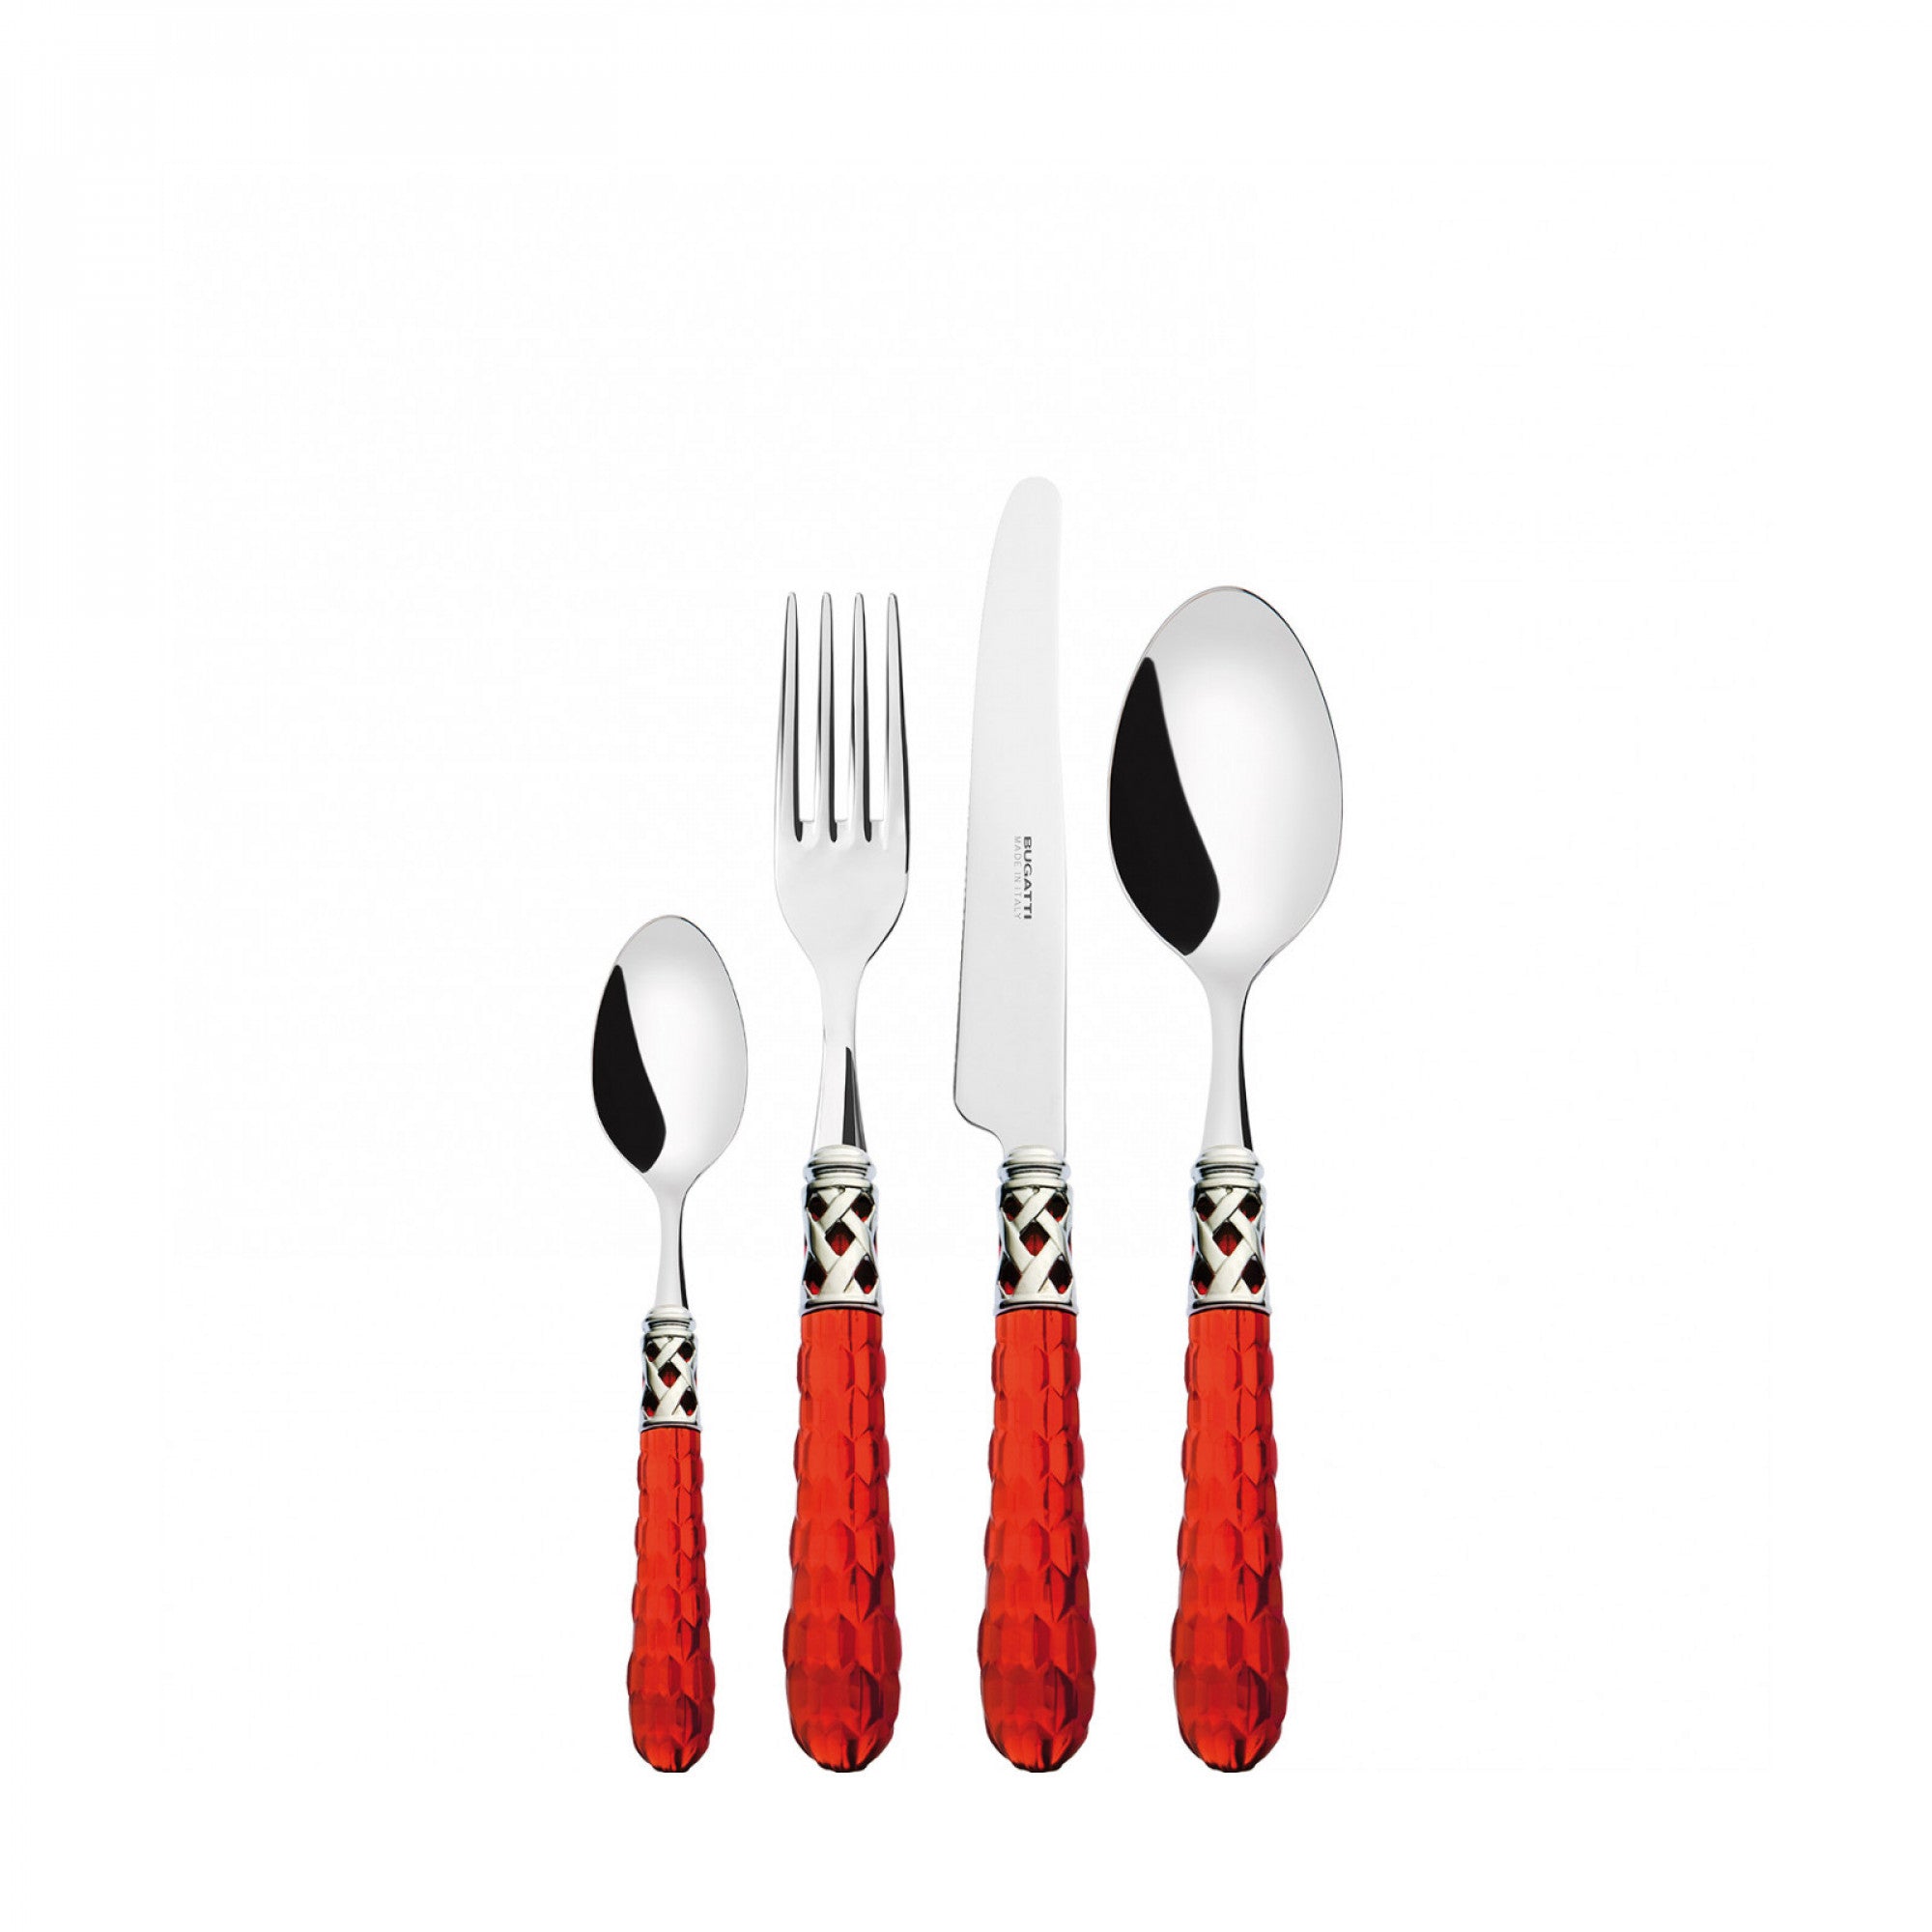 BUGATTI, Bohemia, 24-piece cutlery set in 18/10 stainless steel, chromed ring. Packaged in a Compact lithographed box